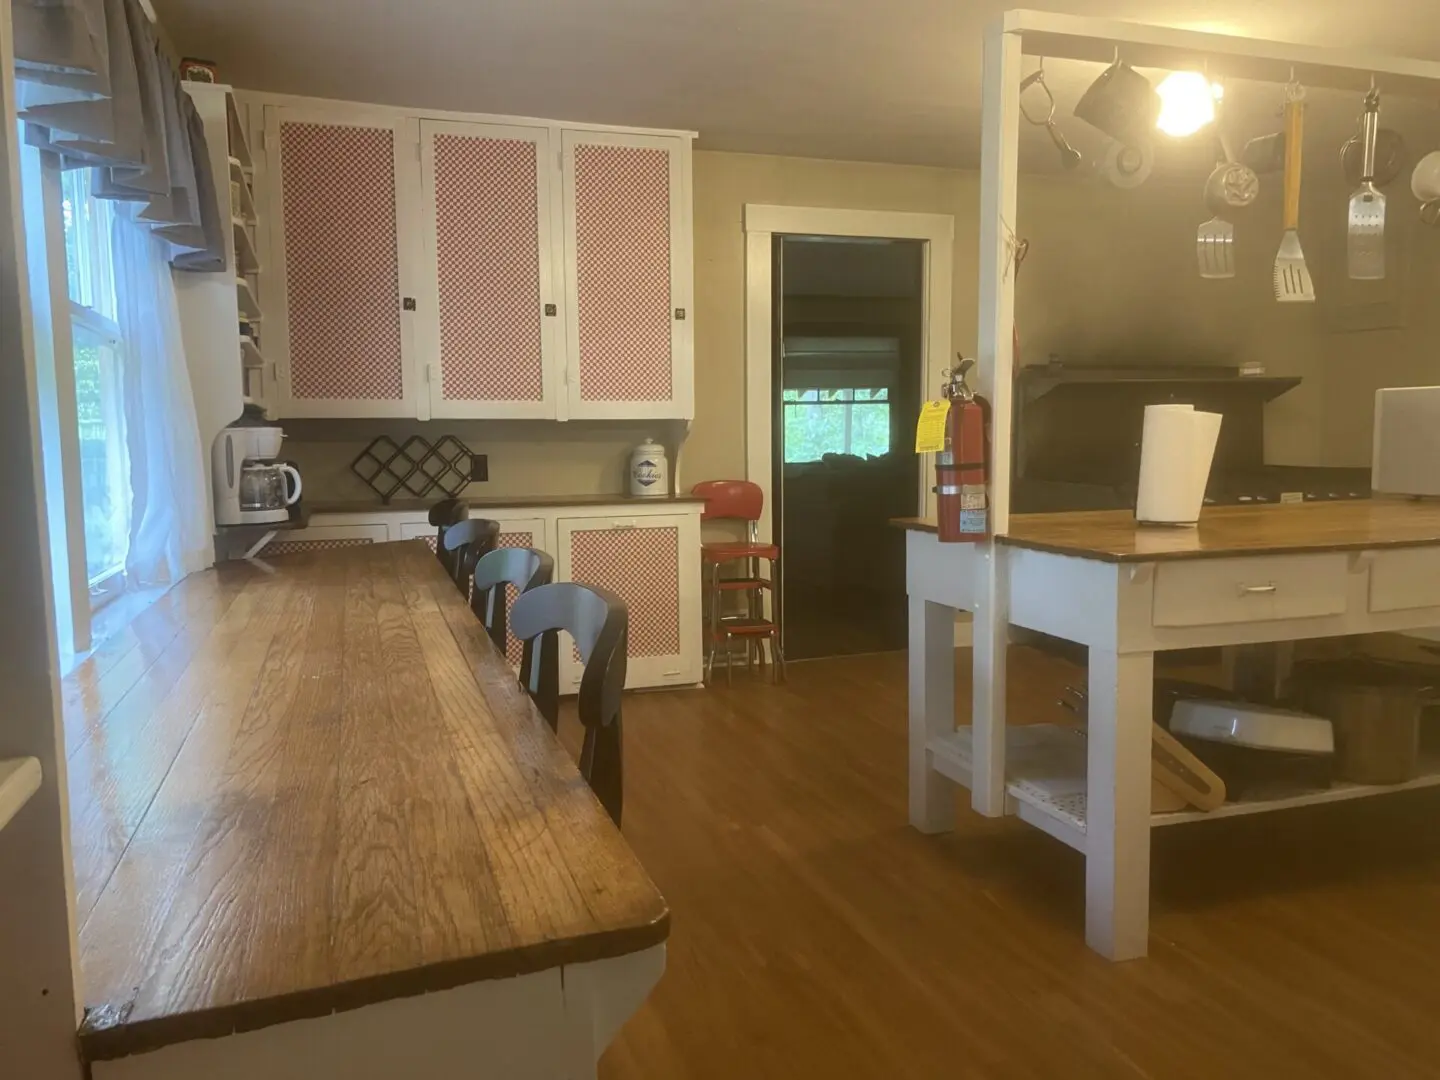 A kitchen with wooden floors and pink cabinets.